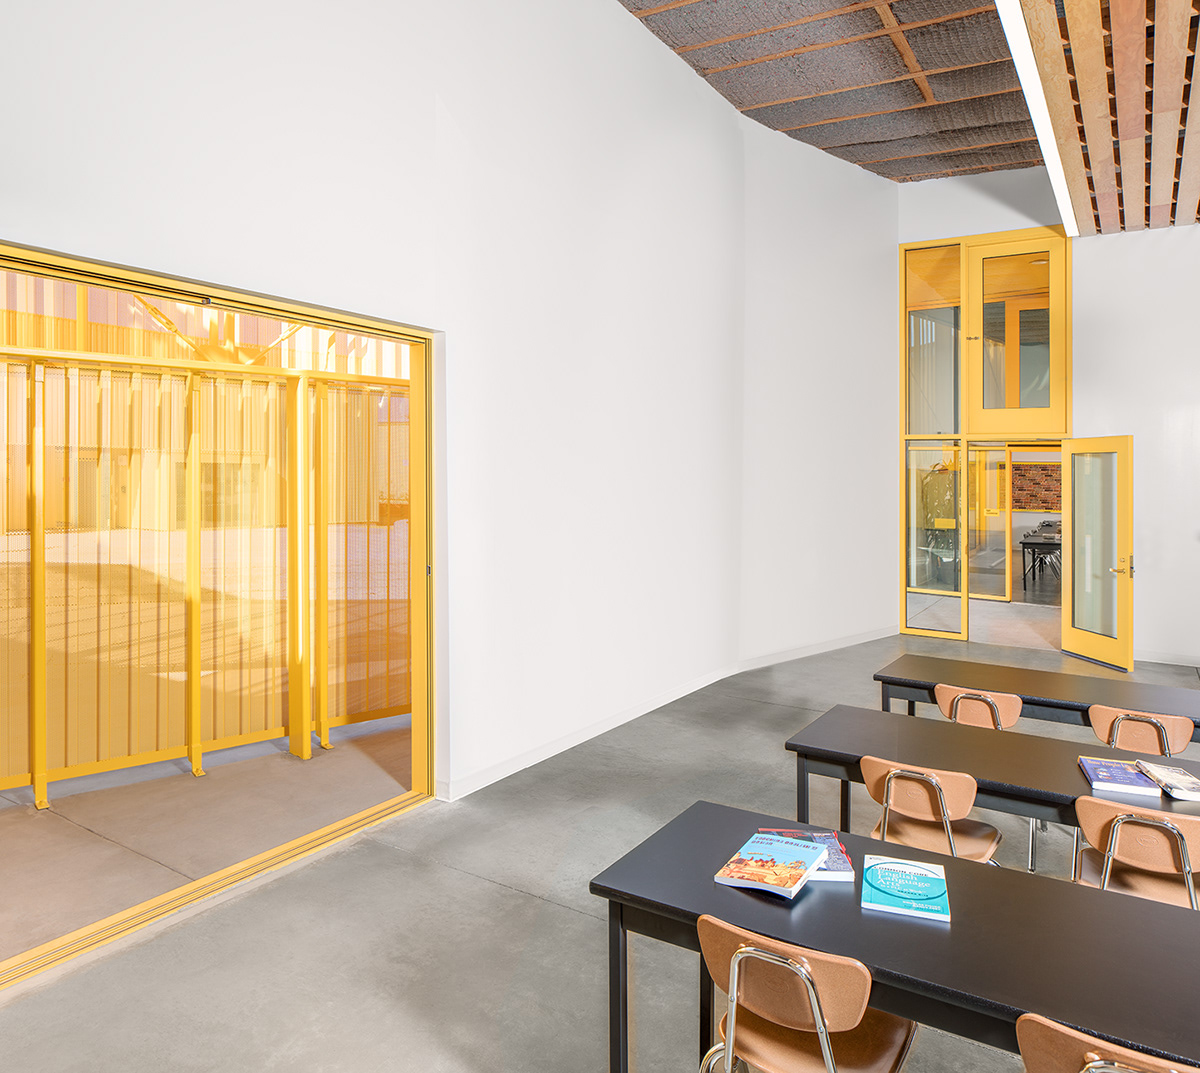 Adobe Portfolio animo south los charter high school Green Dot School lawrence scarpa perforated metal facade recycled concrete School Design Yellow school built around oil well modern school courtyard natural wool insulation perforated metal siding Yellow Building